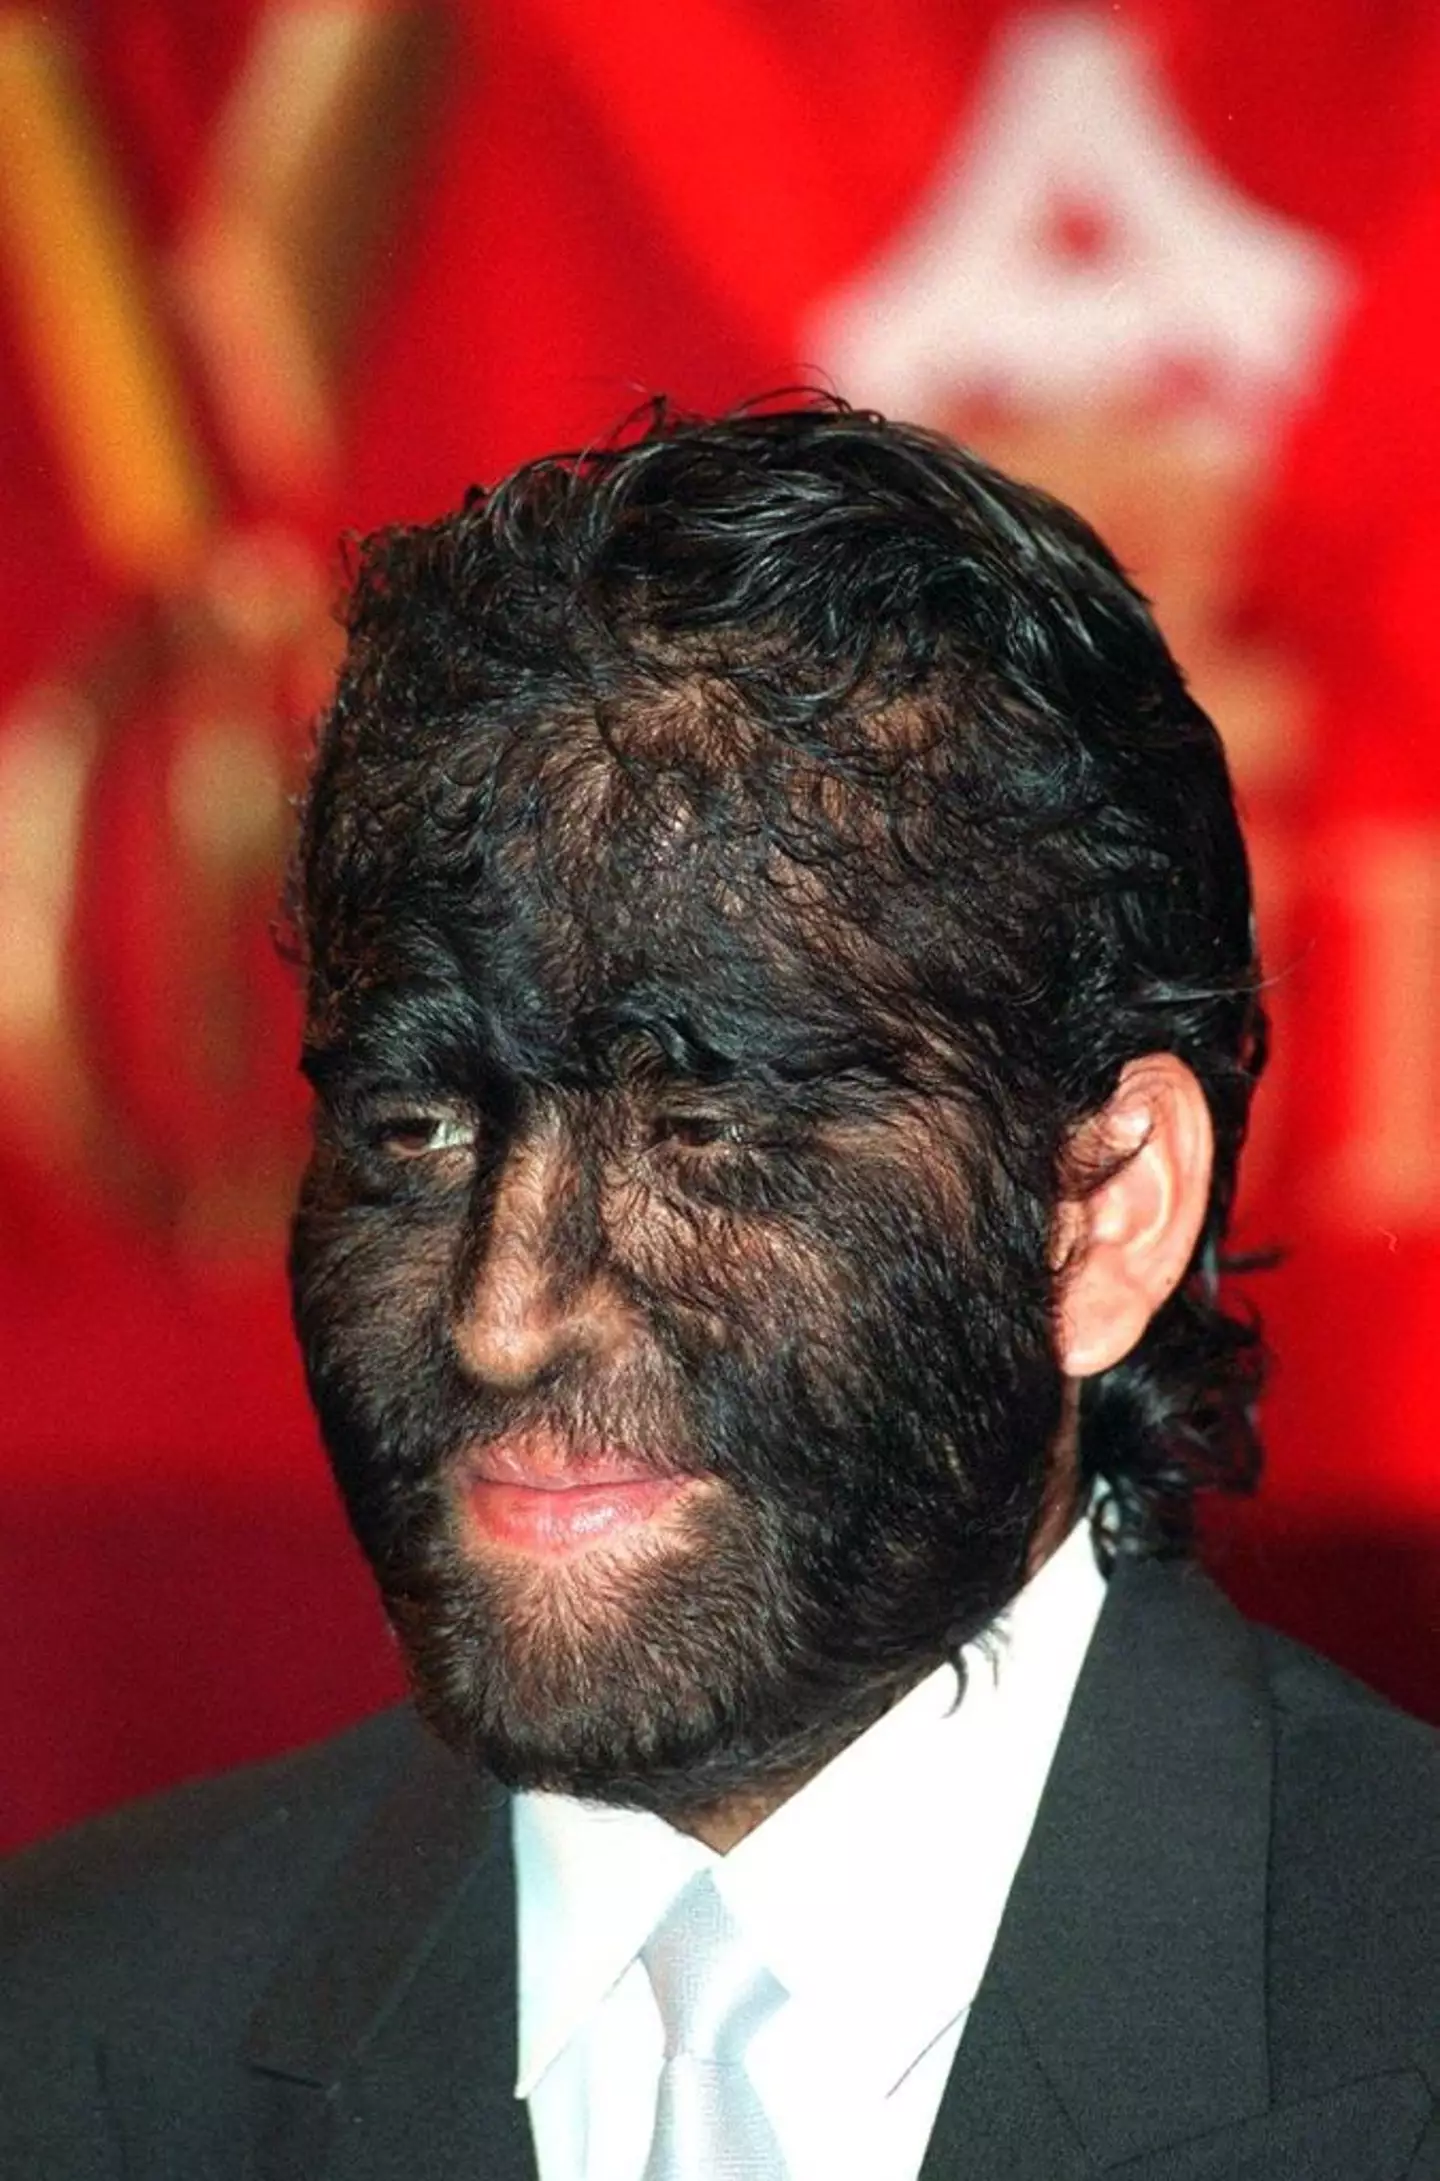 Jesus Manuel Fajardo Aceves is a member of the world's hairiest family. (TAO-CHUAN YEH/AFP via Getty Images)